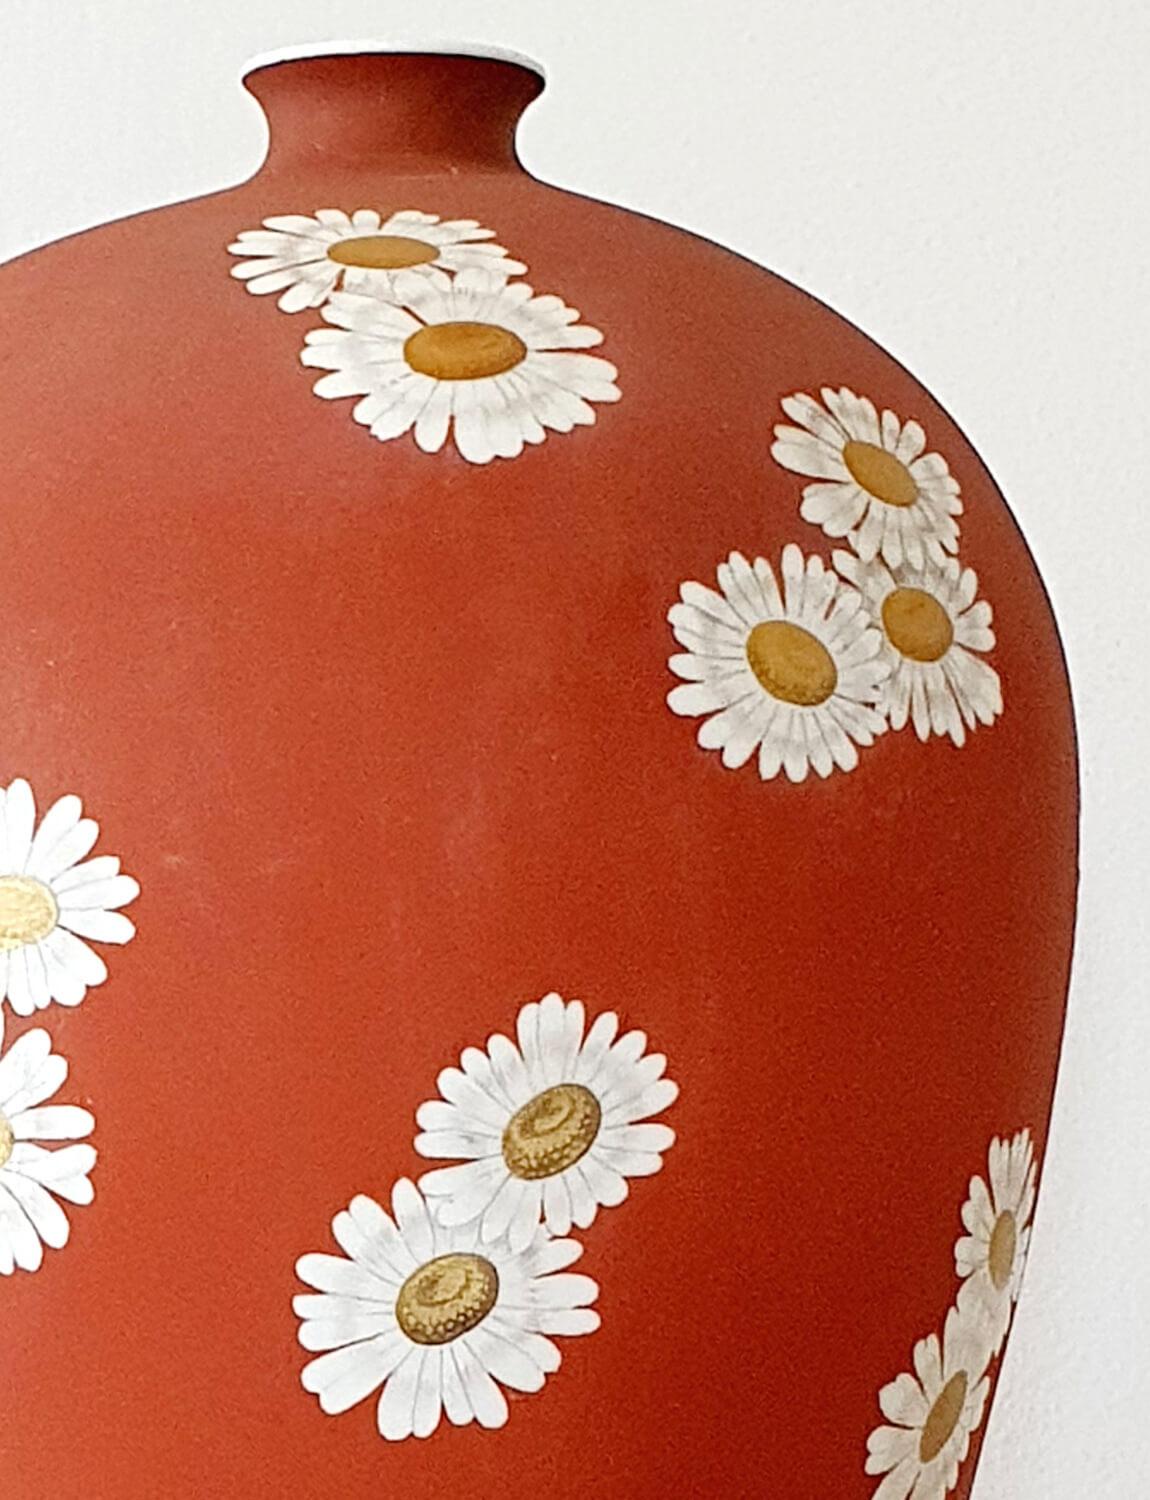 Exceptional large red matt ceramic vase decorated with hand-painted daisies in gold and white and finished with a gold rim at the top. Signed and stamped Richard Ginori Pittoria di Doccia on the base. This vase was created under the direction of the